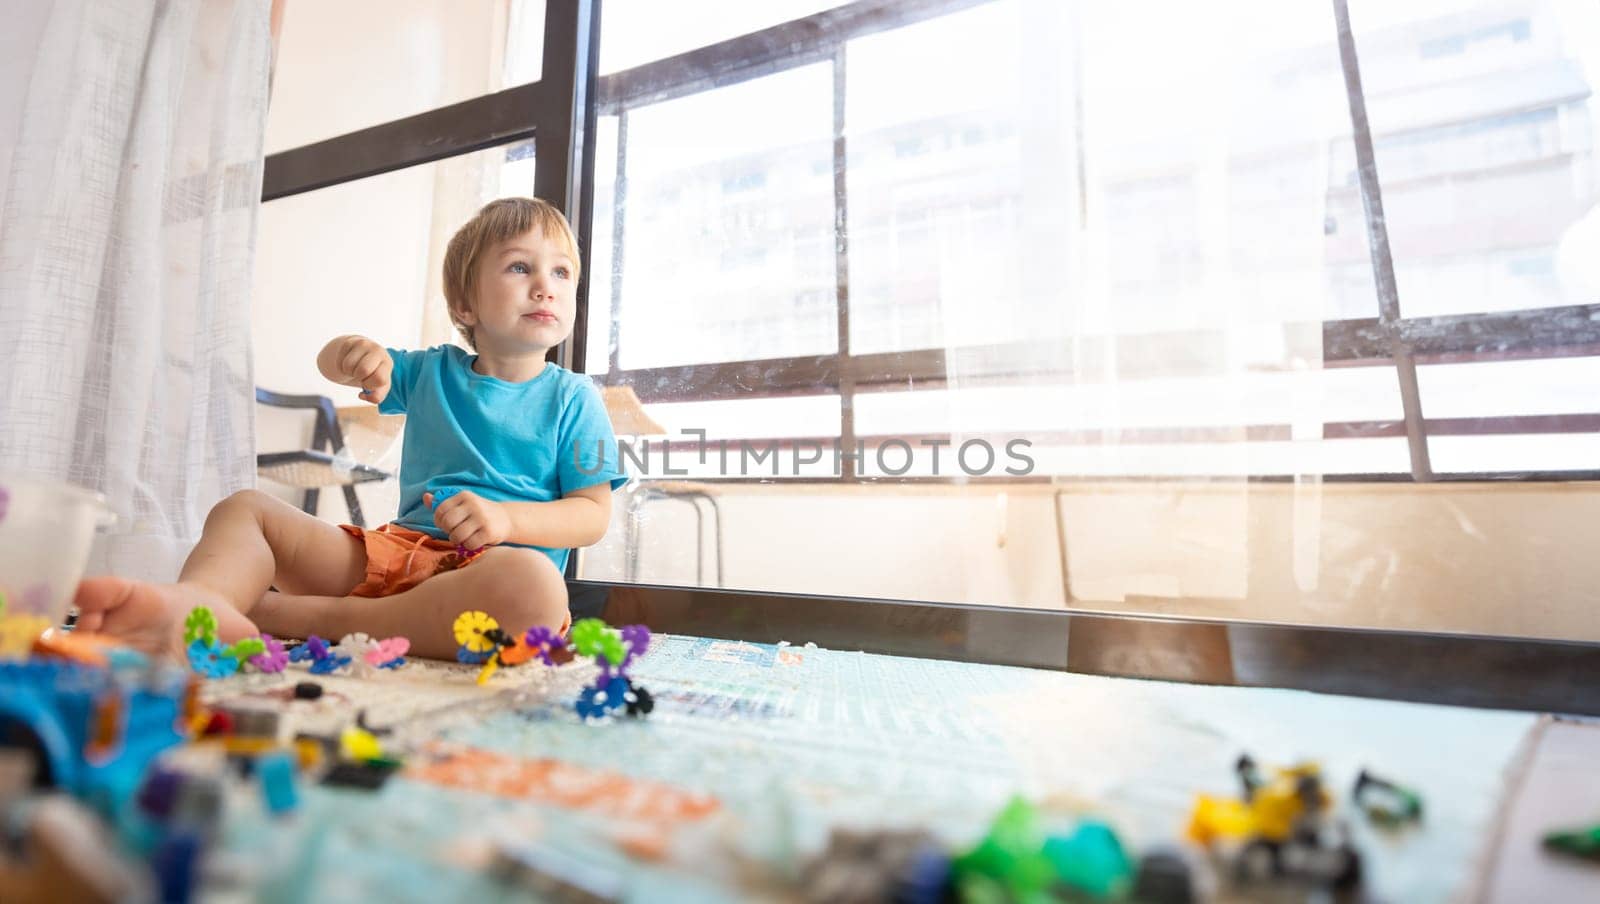 A little boy sitting on a chair in front of a window